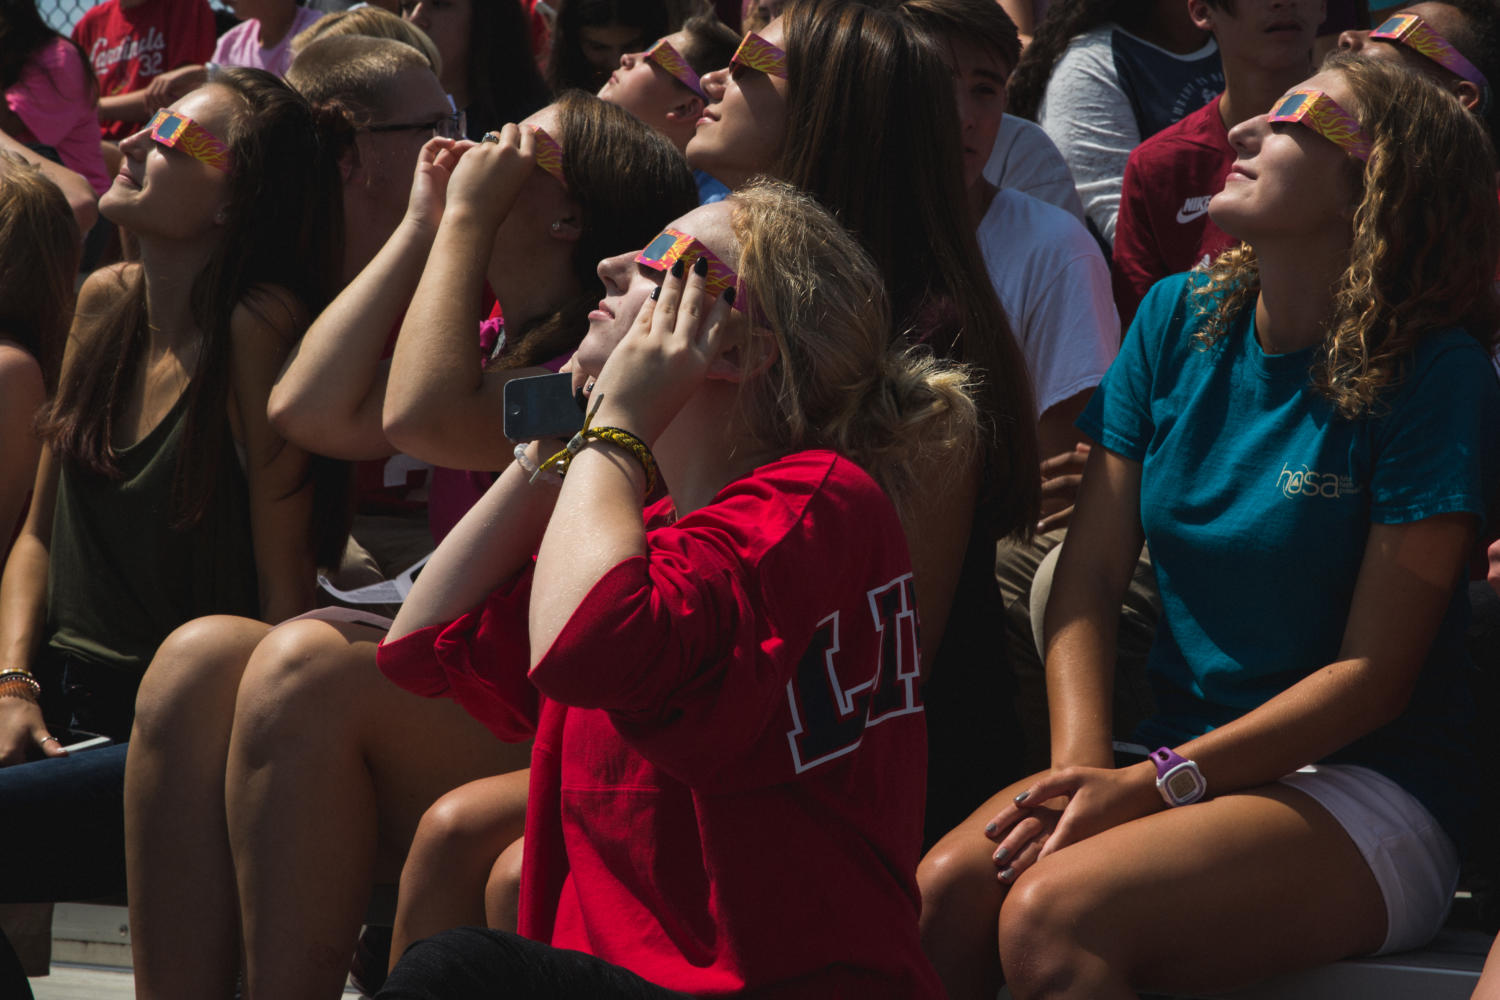 Students at Liberty witness their very first partial eclipse. The crowd talked on the football bleachers while waiting for the path of totality.